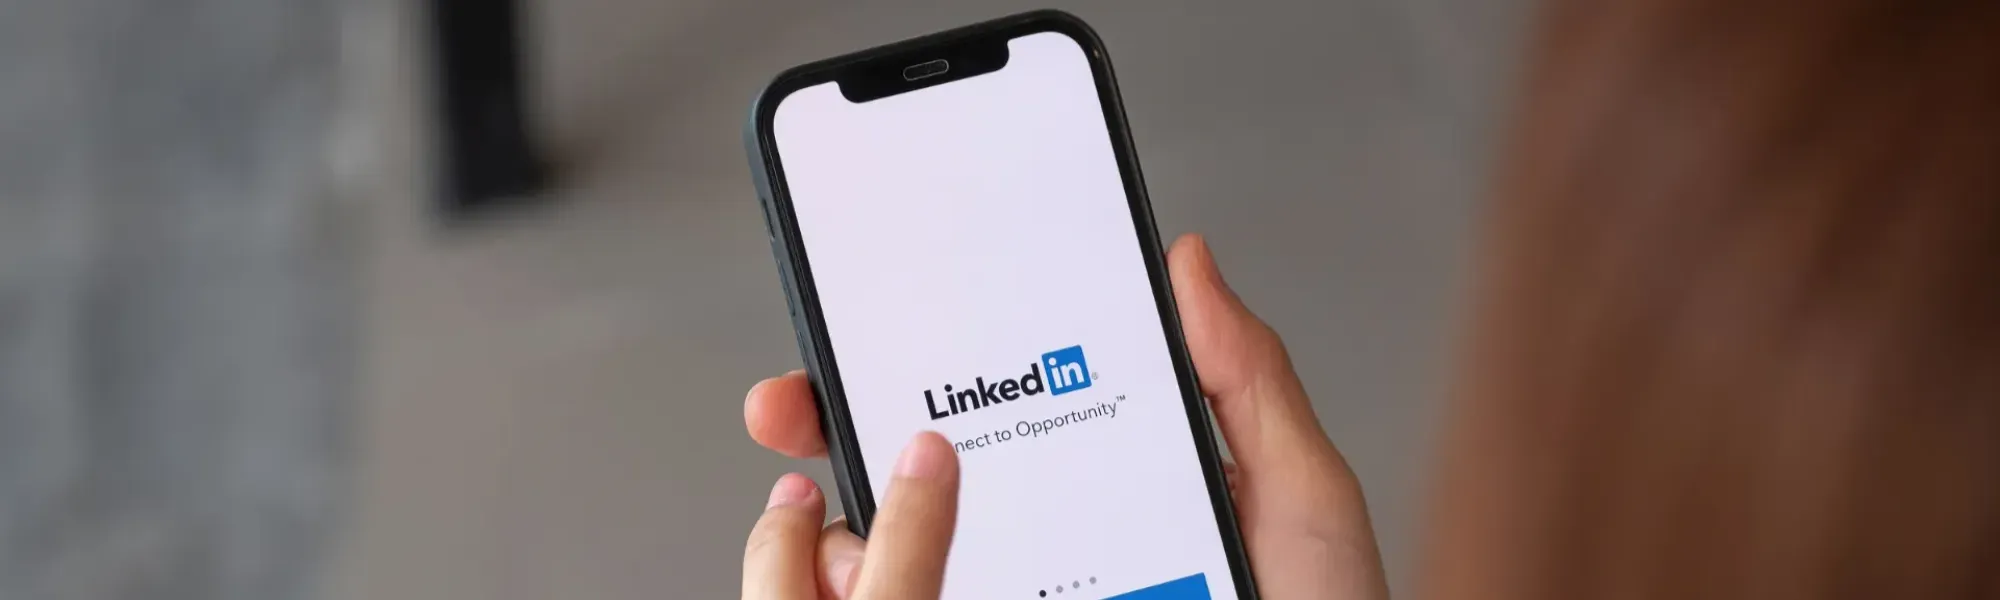 Using LinkedIn for your job search - Faststream Recruitment